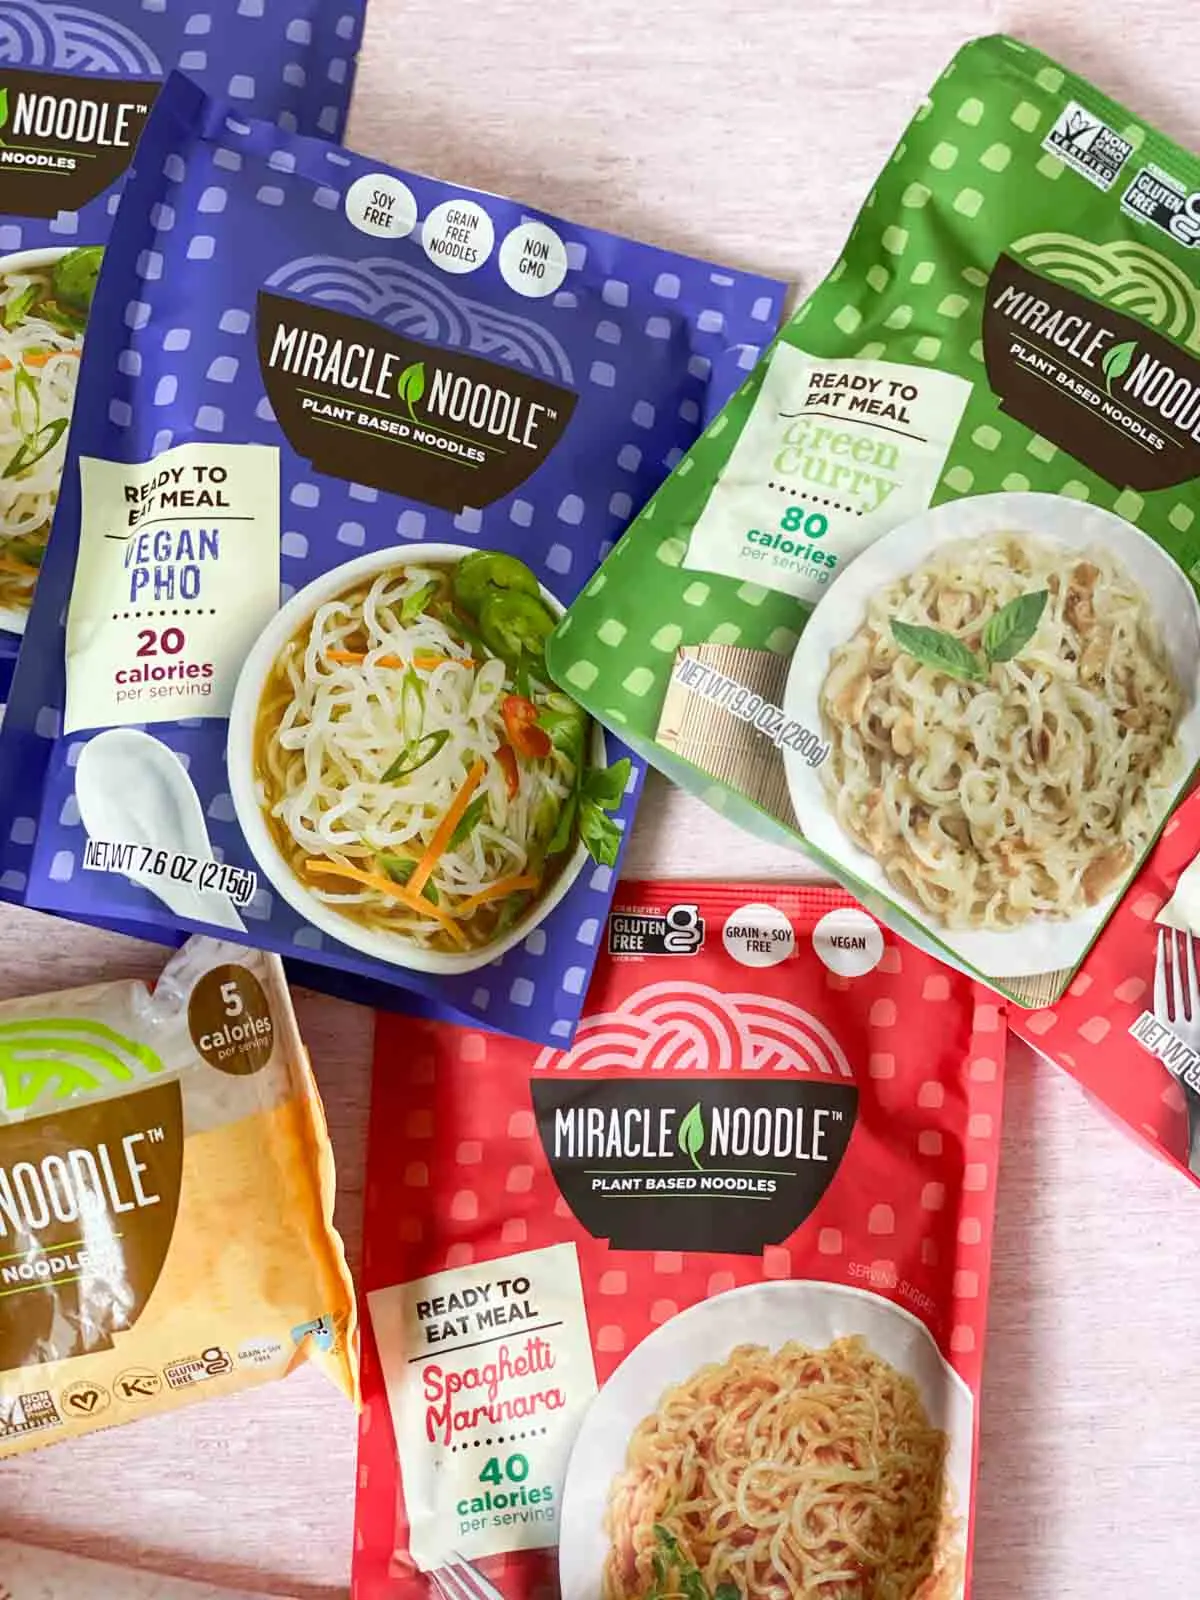 Miracle noodle packages - spaghetti marinara, vegan pho, and green curry